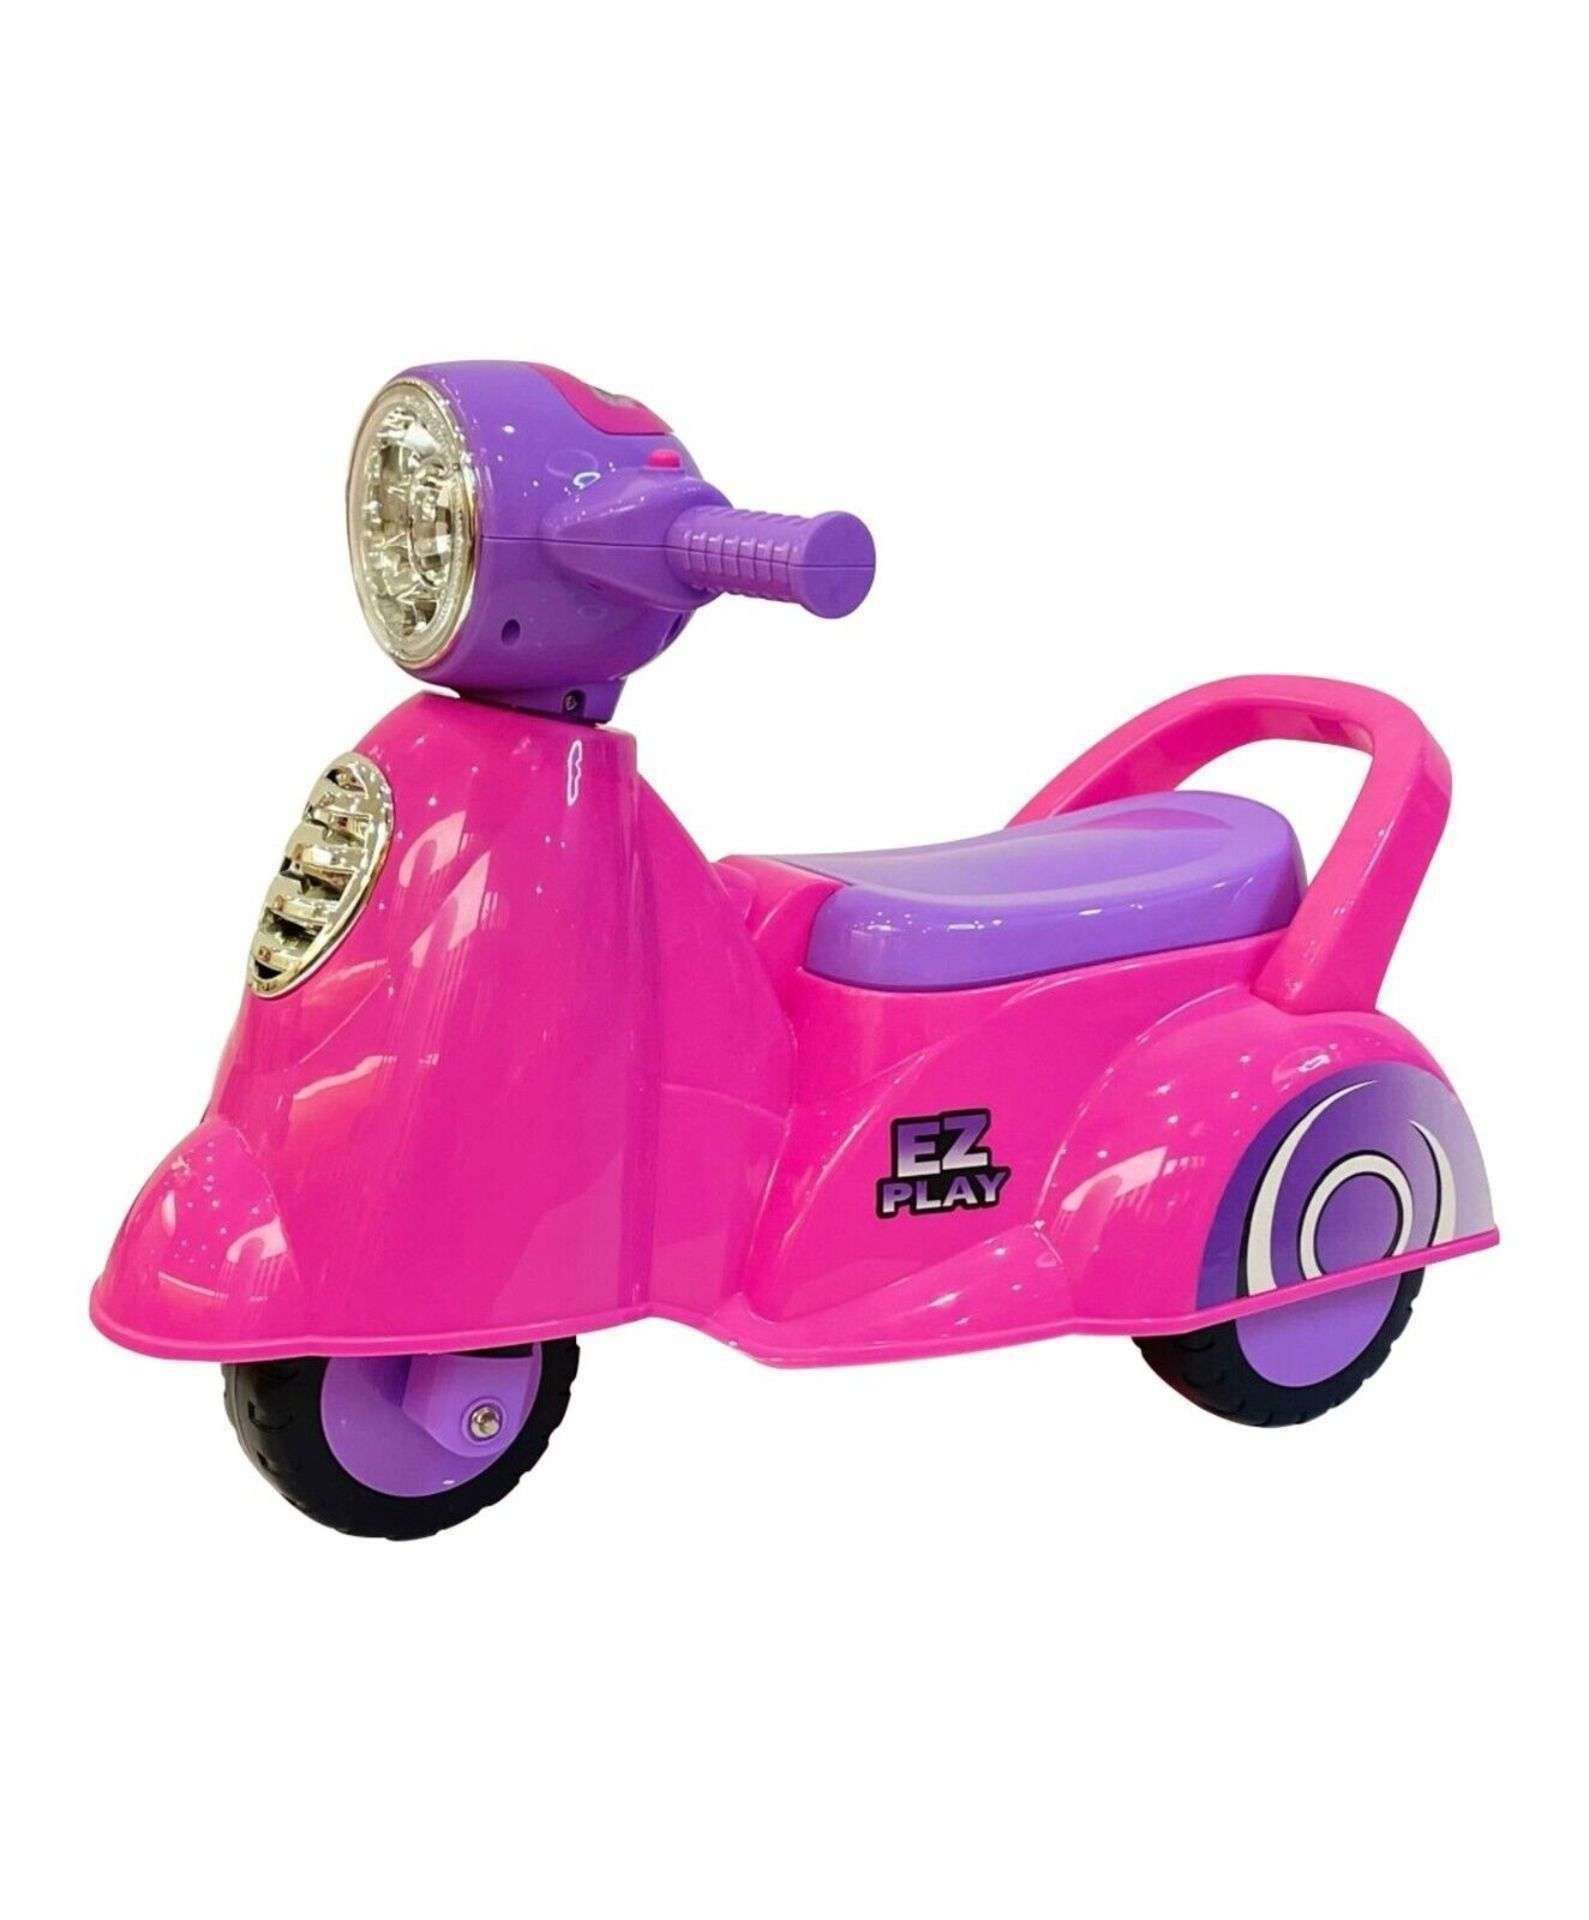 2 X BRAND NEW RICCO TOYS PINK RIDE ON SCOOTERS R7-5